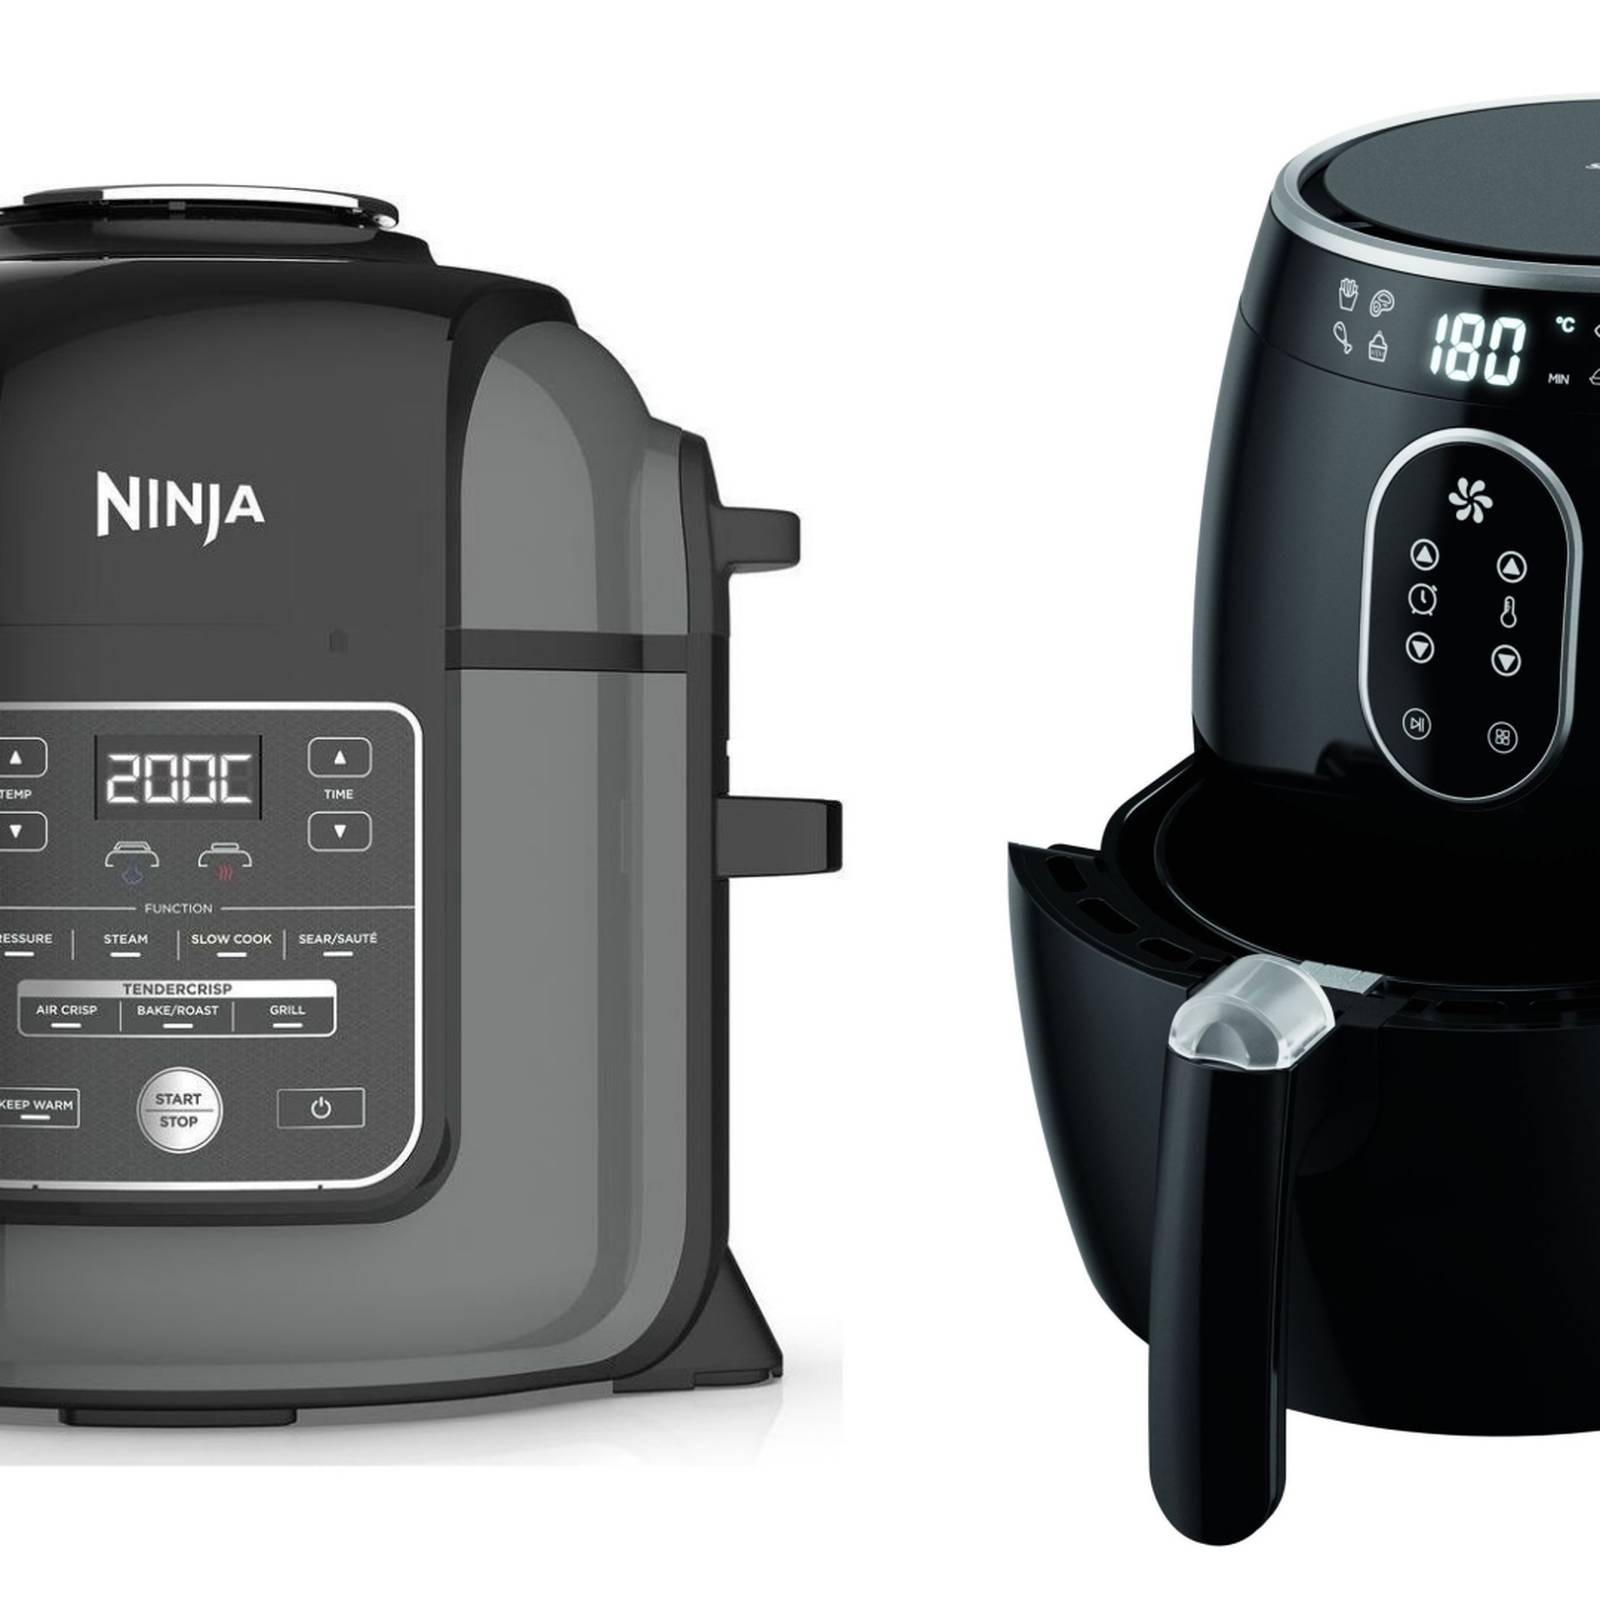 Ninja Air Fryer Max Review: The perfect takeaway at home?